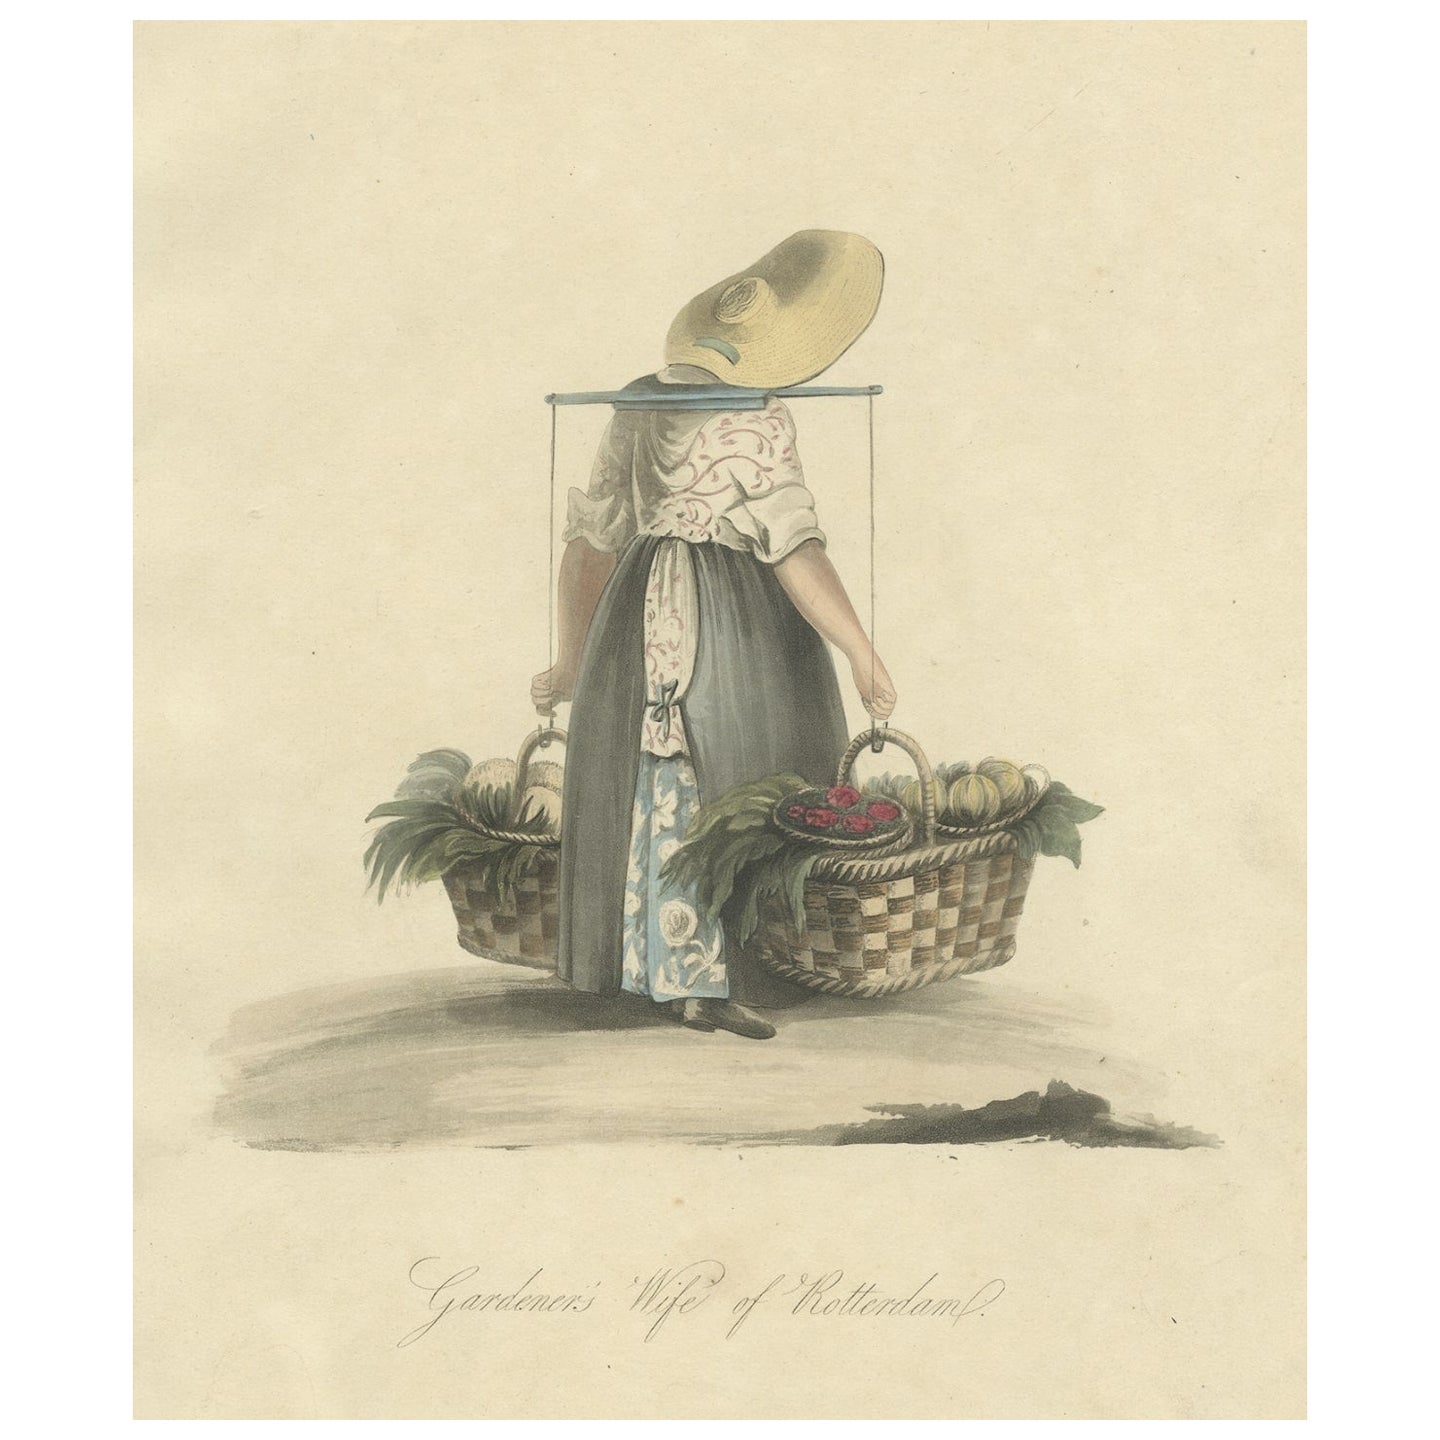 Decorative Antique Print of a Gardeners Wife of Rotterdam, the Netherlands, 1817 For Sale